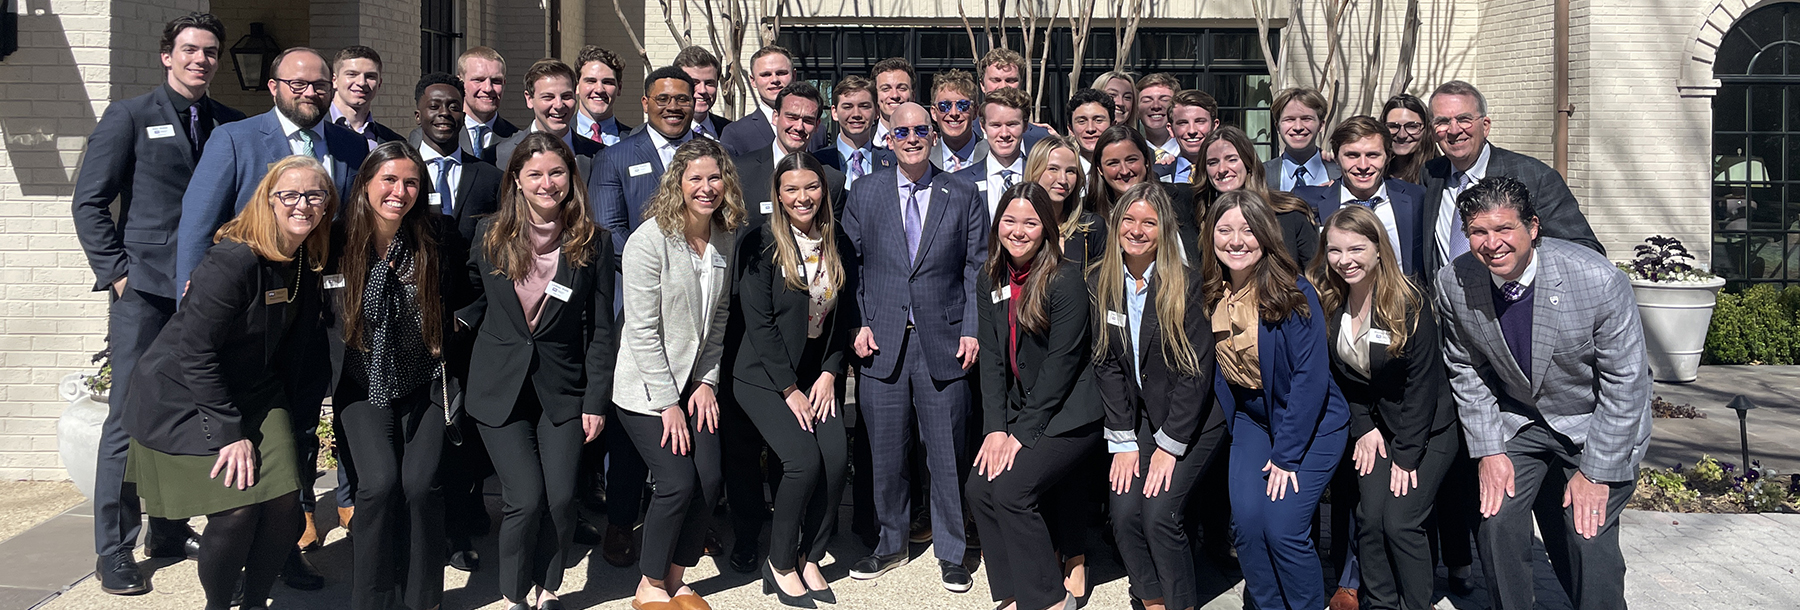 Section Image: Neeley Fellows with Chancellor Boschini and President Pullin 